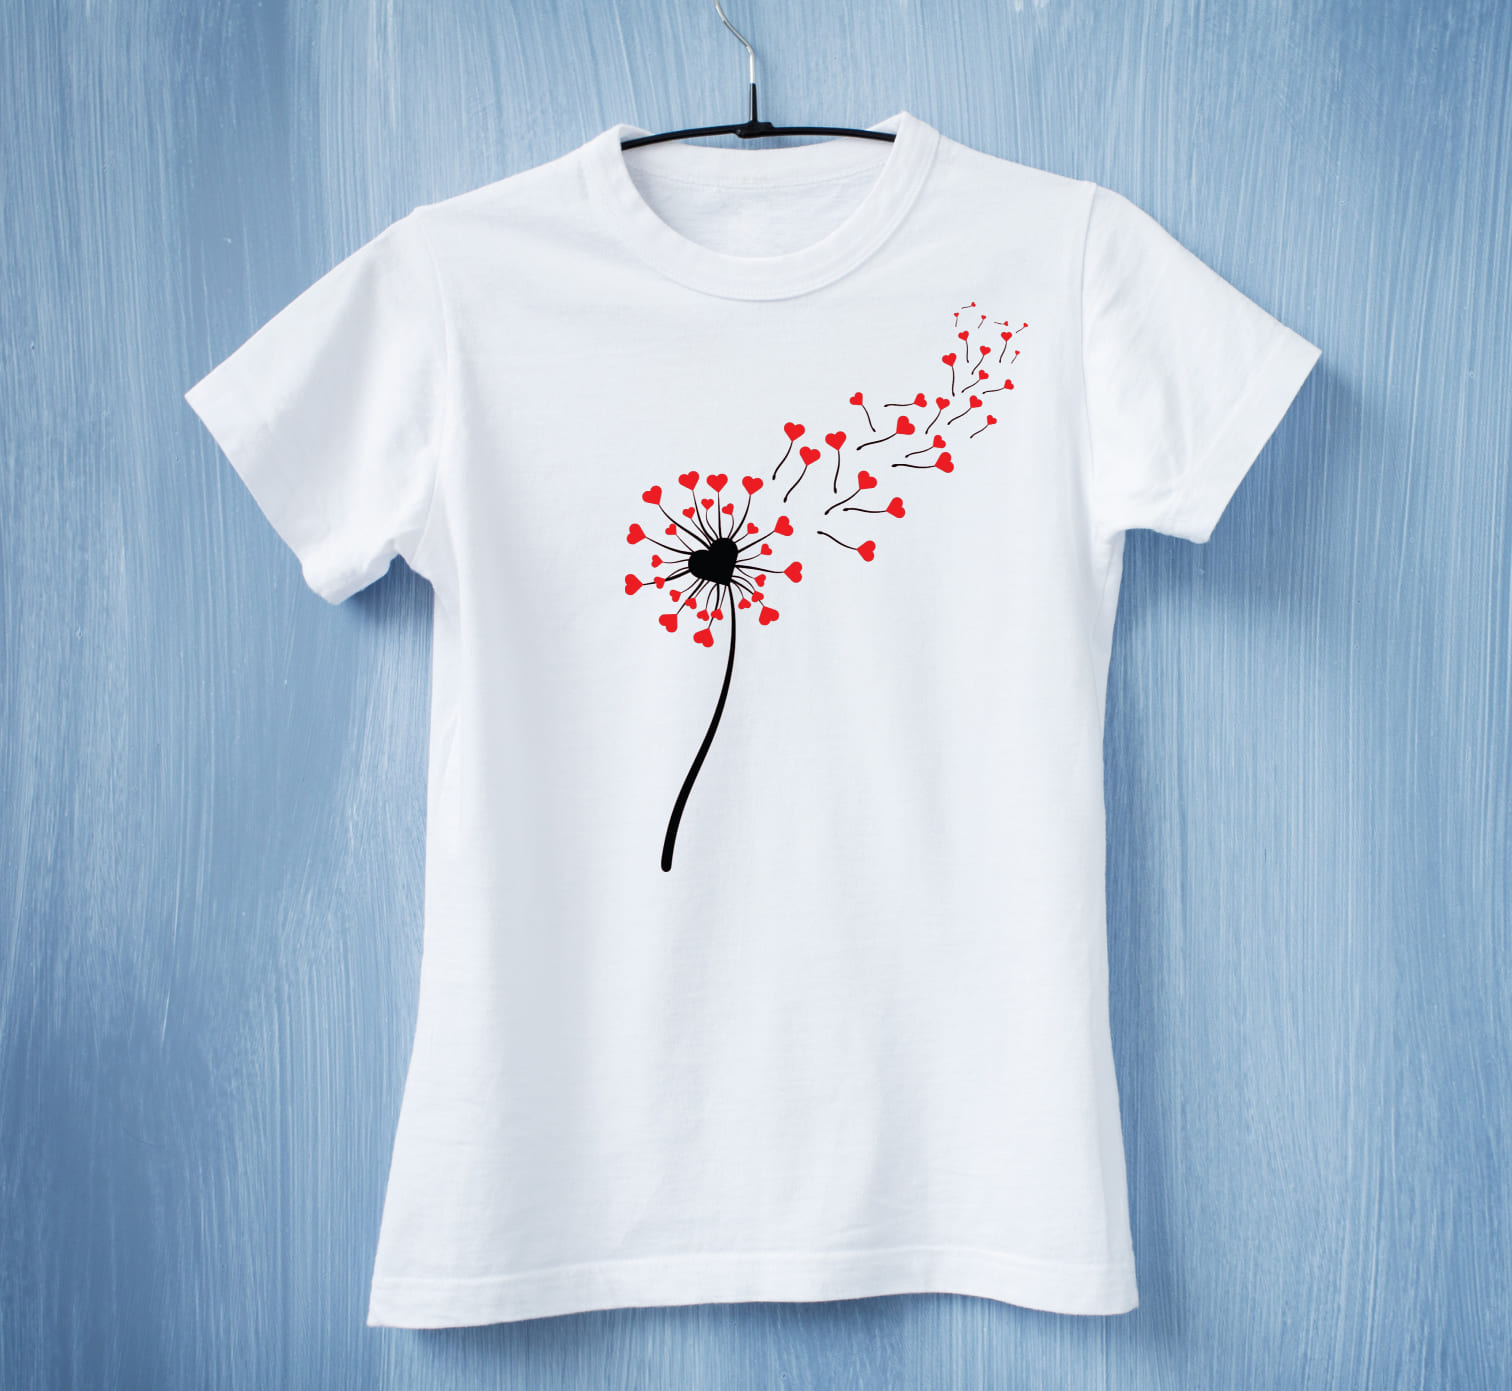 A white t-shirt with a black dandelion flower with red hearts on a blue background.